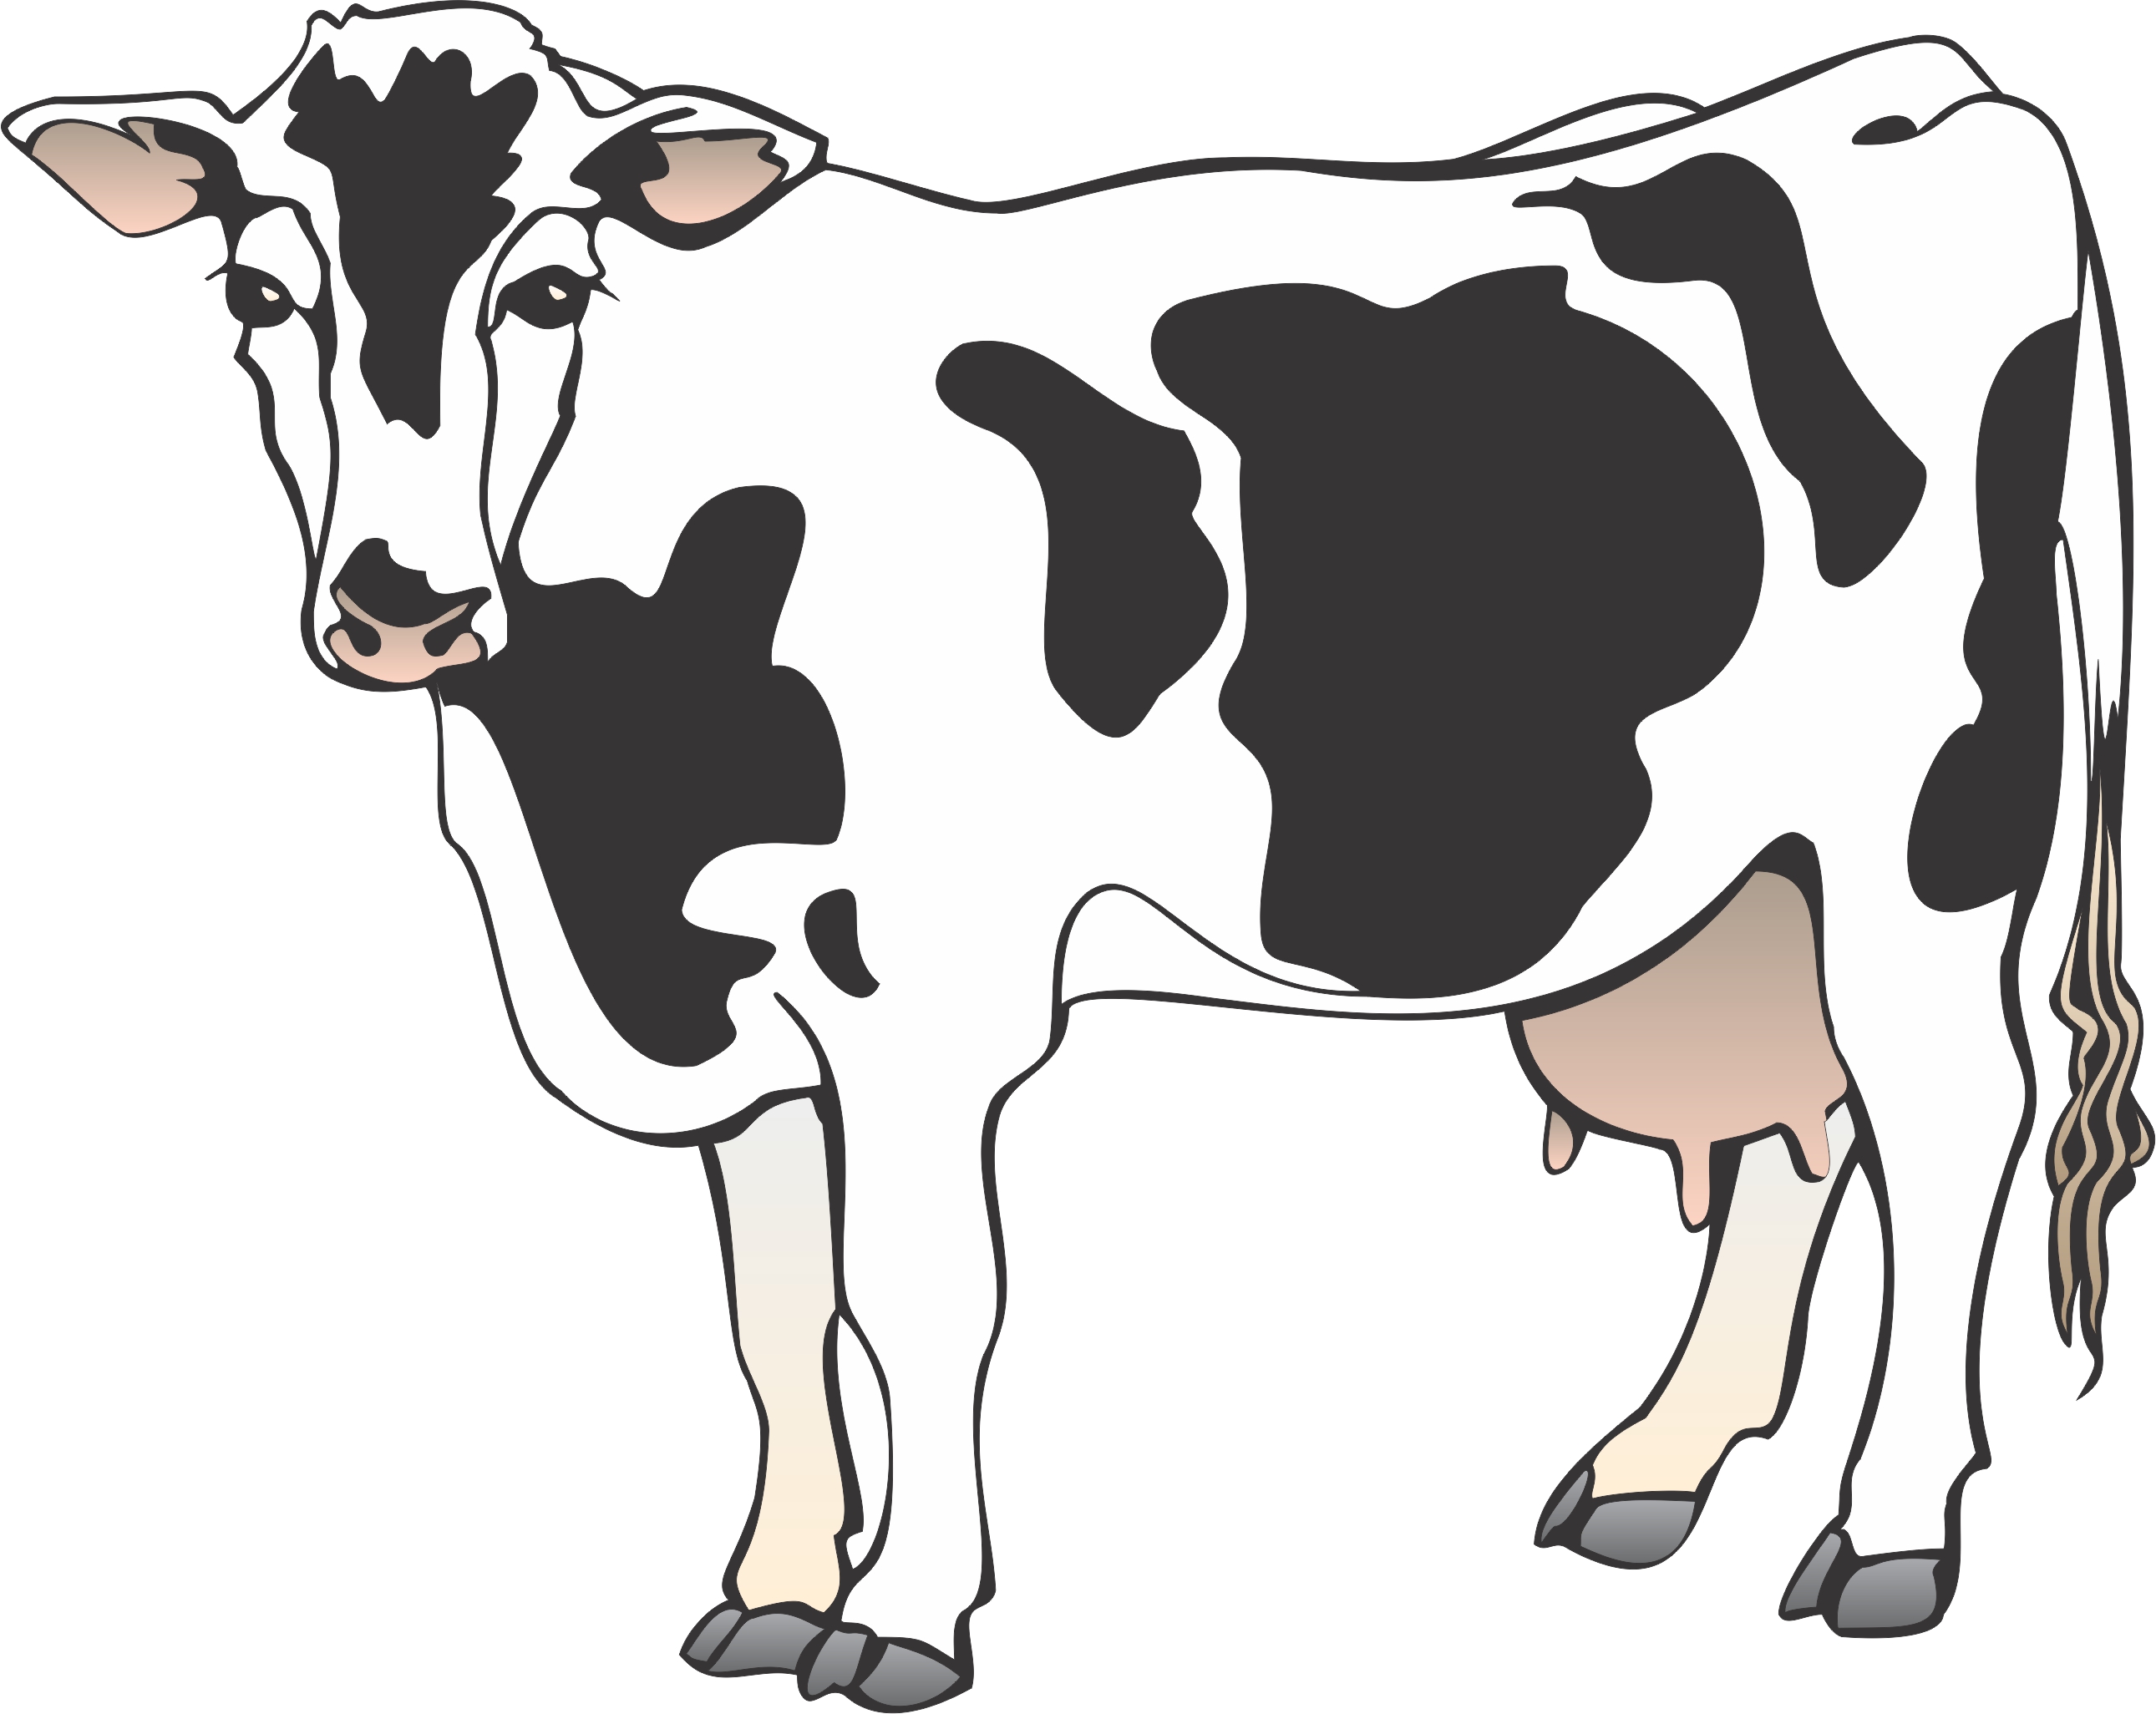 Cartoon Pictures Images 2013: Cow Cartoon Pictures Free JCartoon 